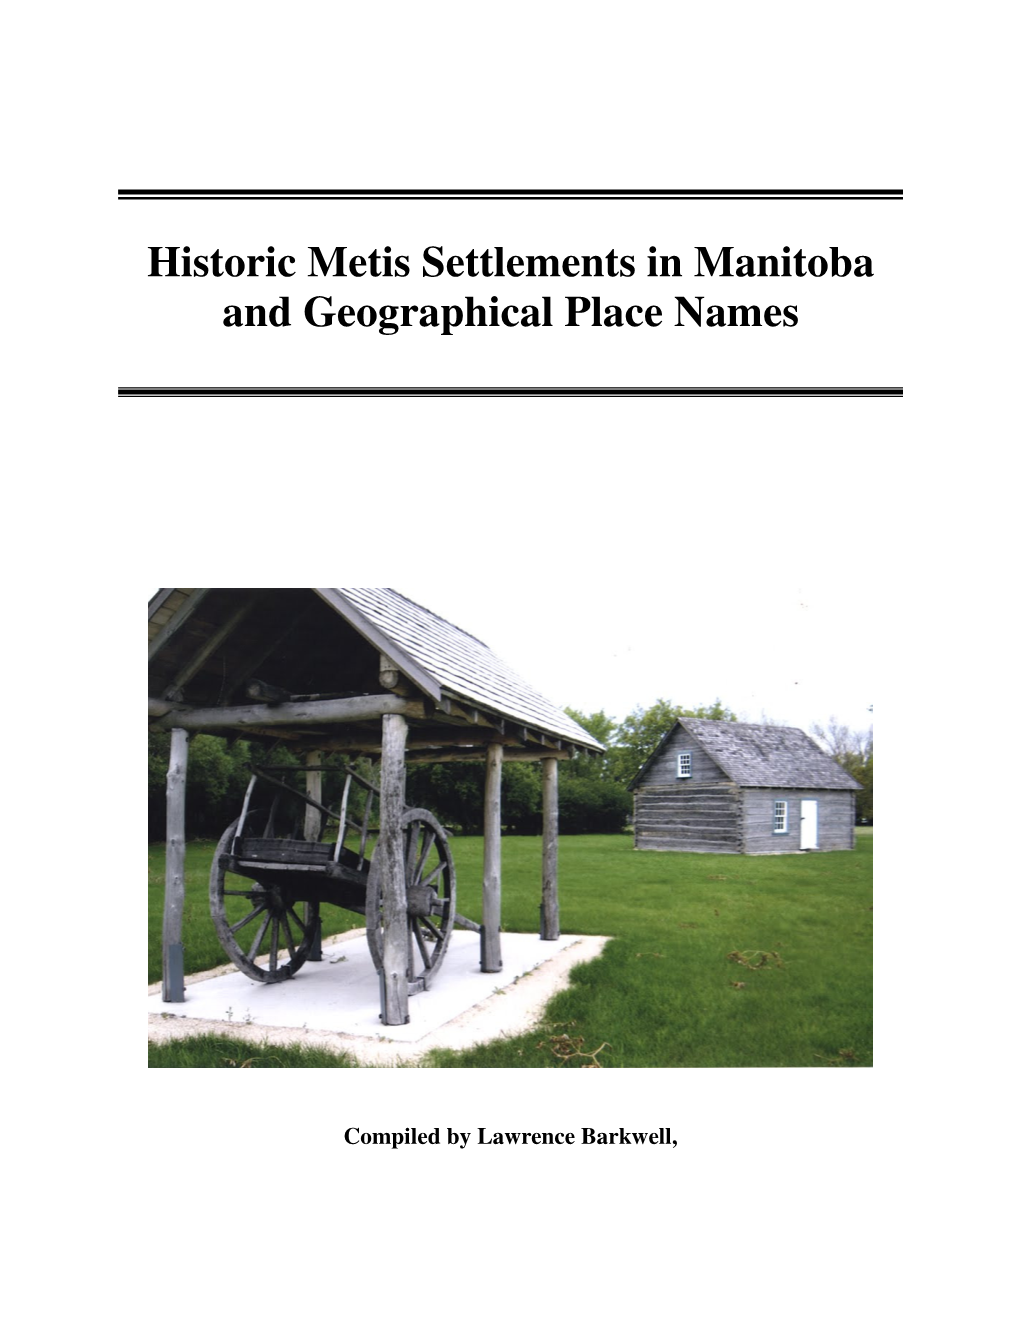 Historic Metis Settlements in Manitoba and Geographical Place Names